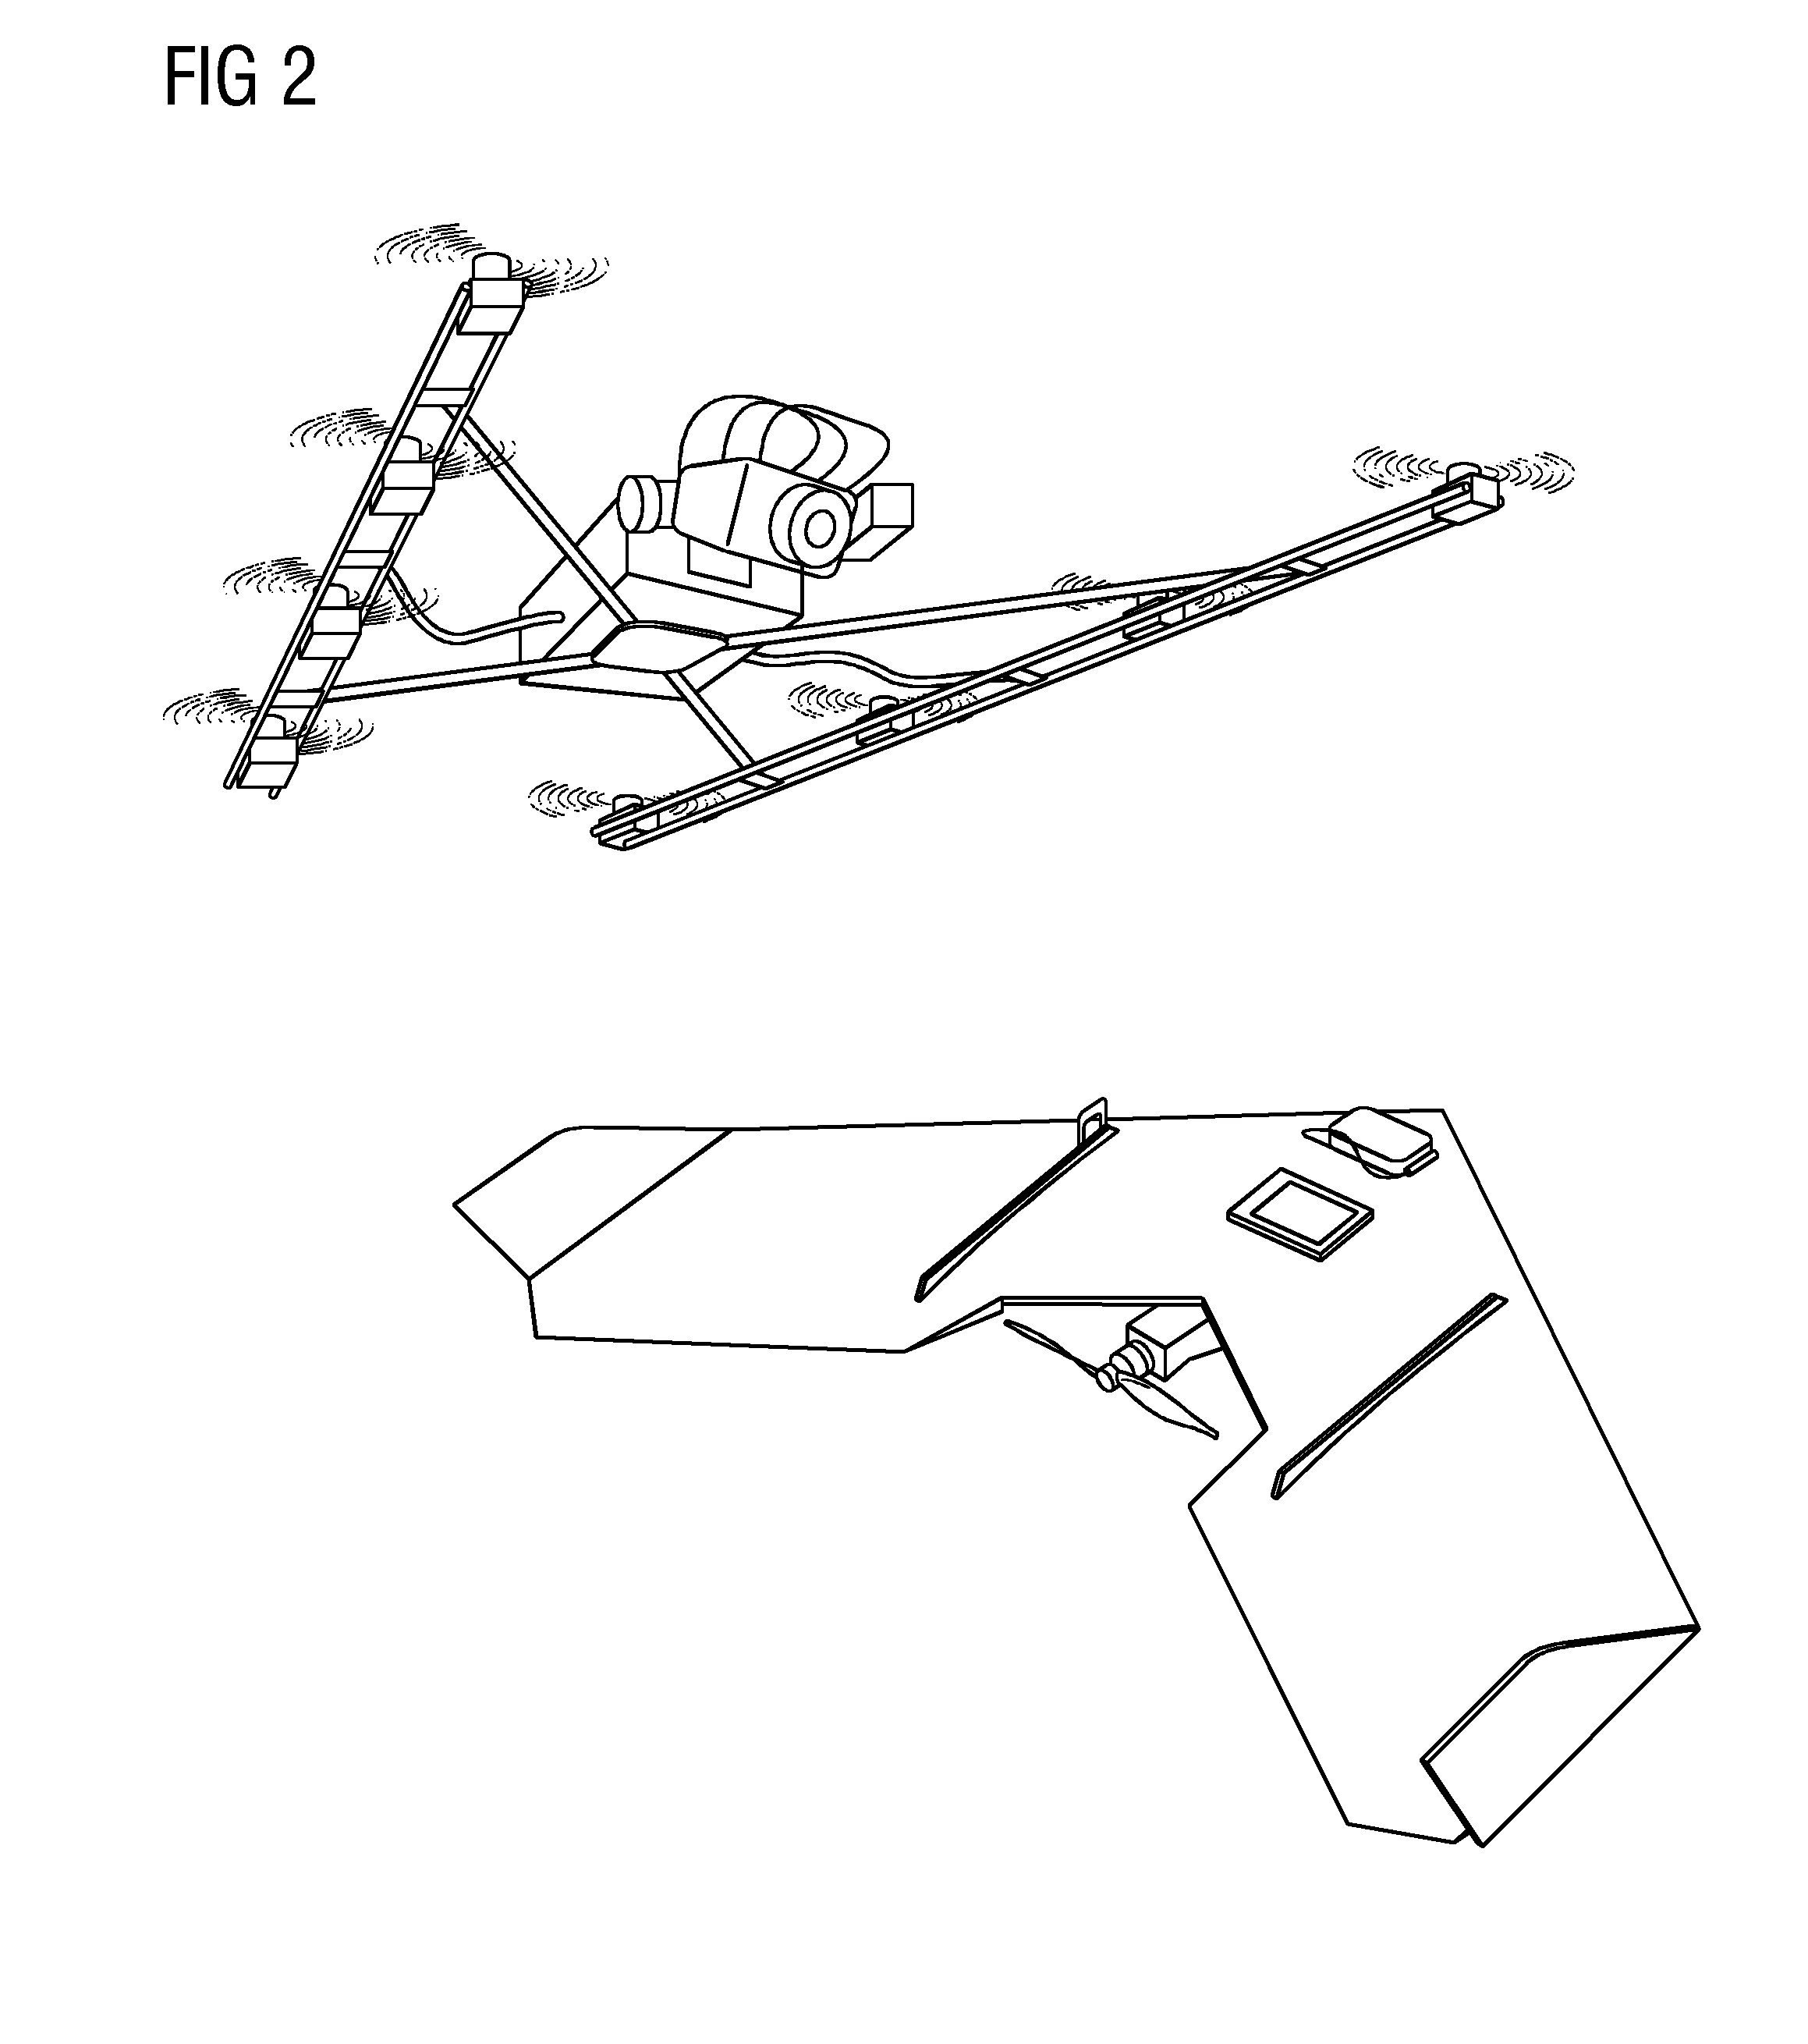 Method to inspect components of a wind turbine